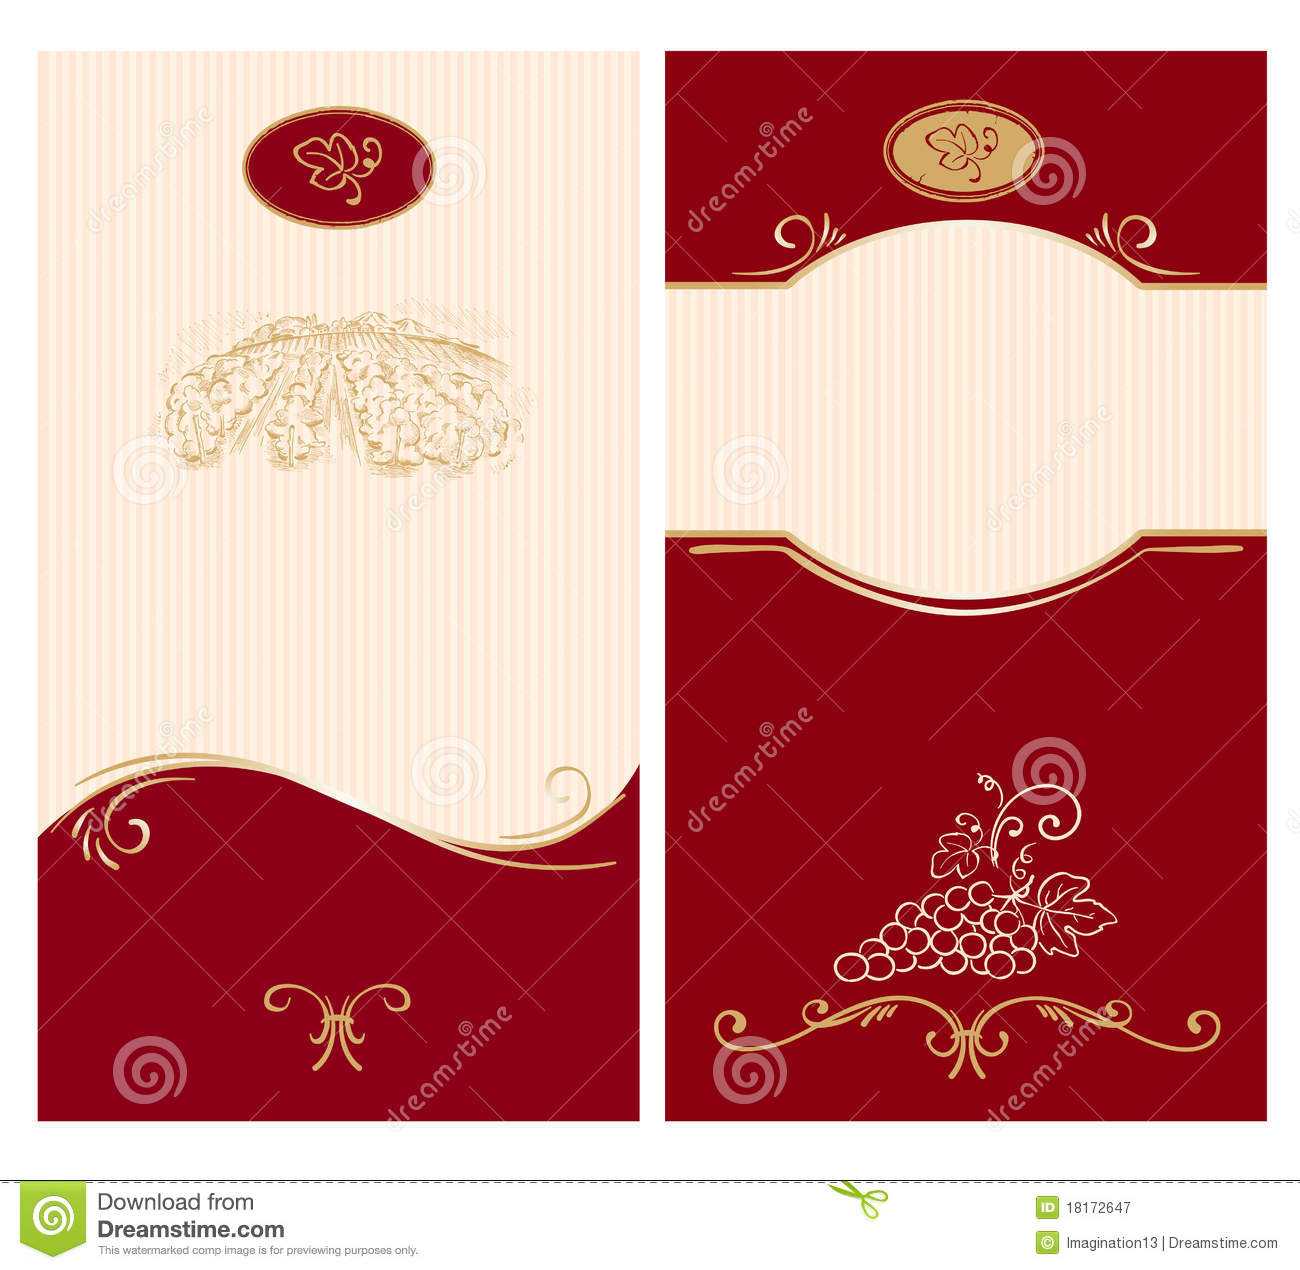 Template For Wine Labels Stock Vector. Illustration Of Throughout Blank Wine Label Template